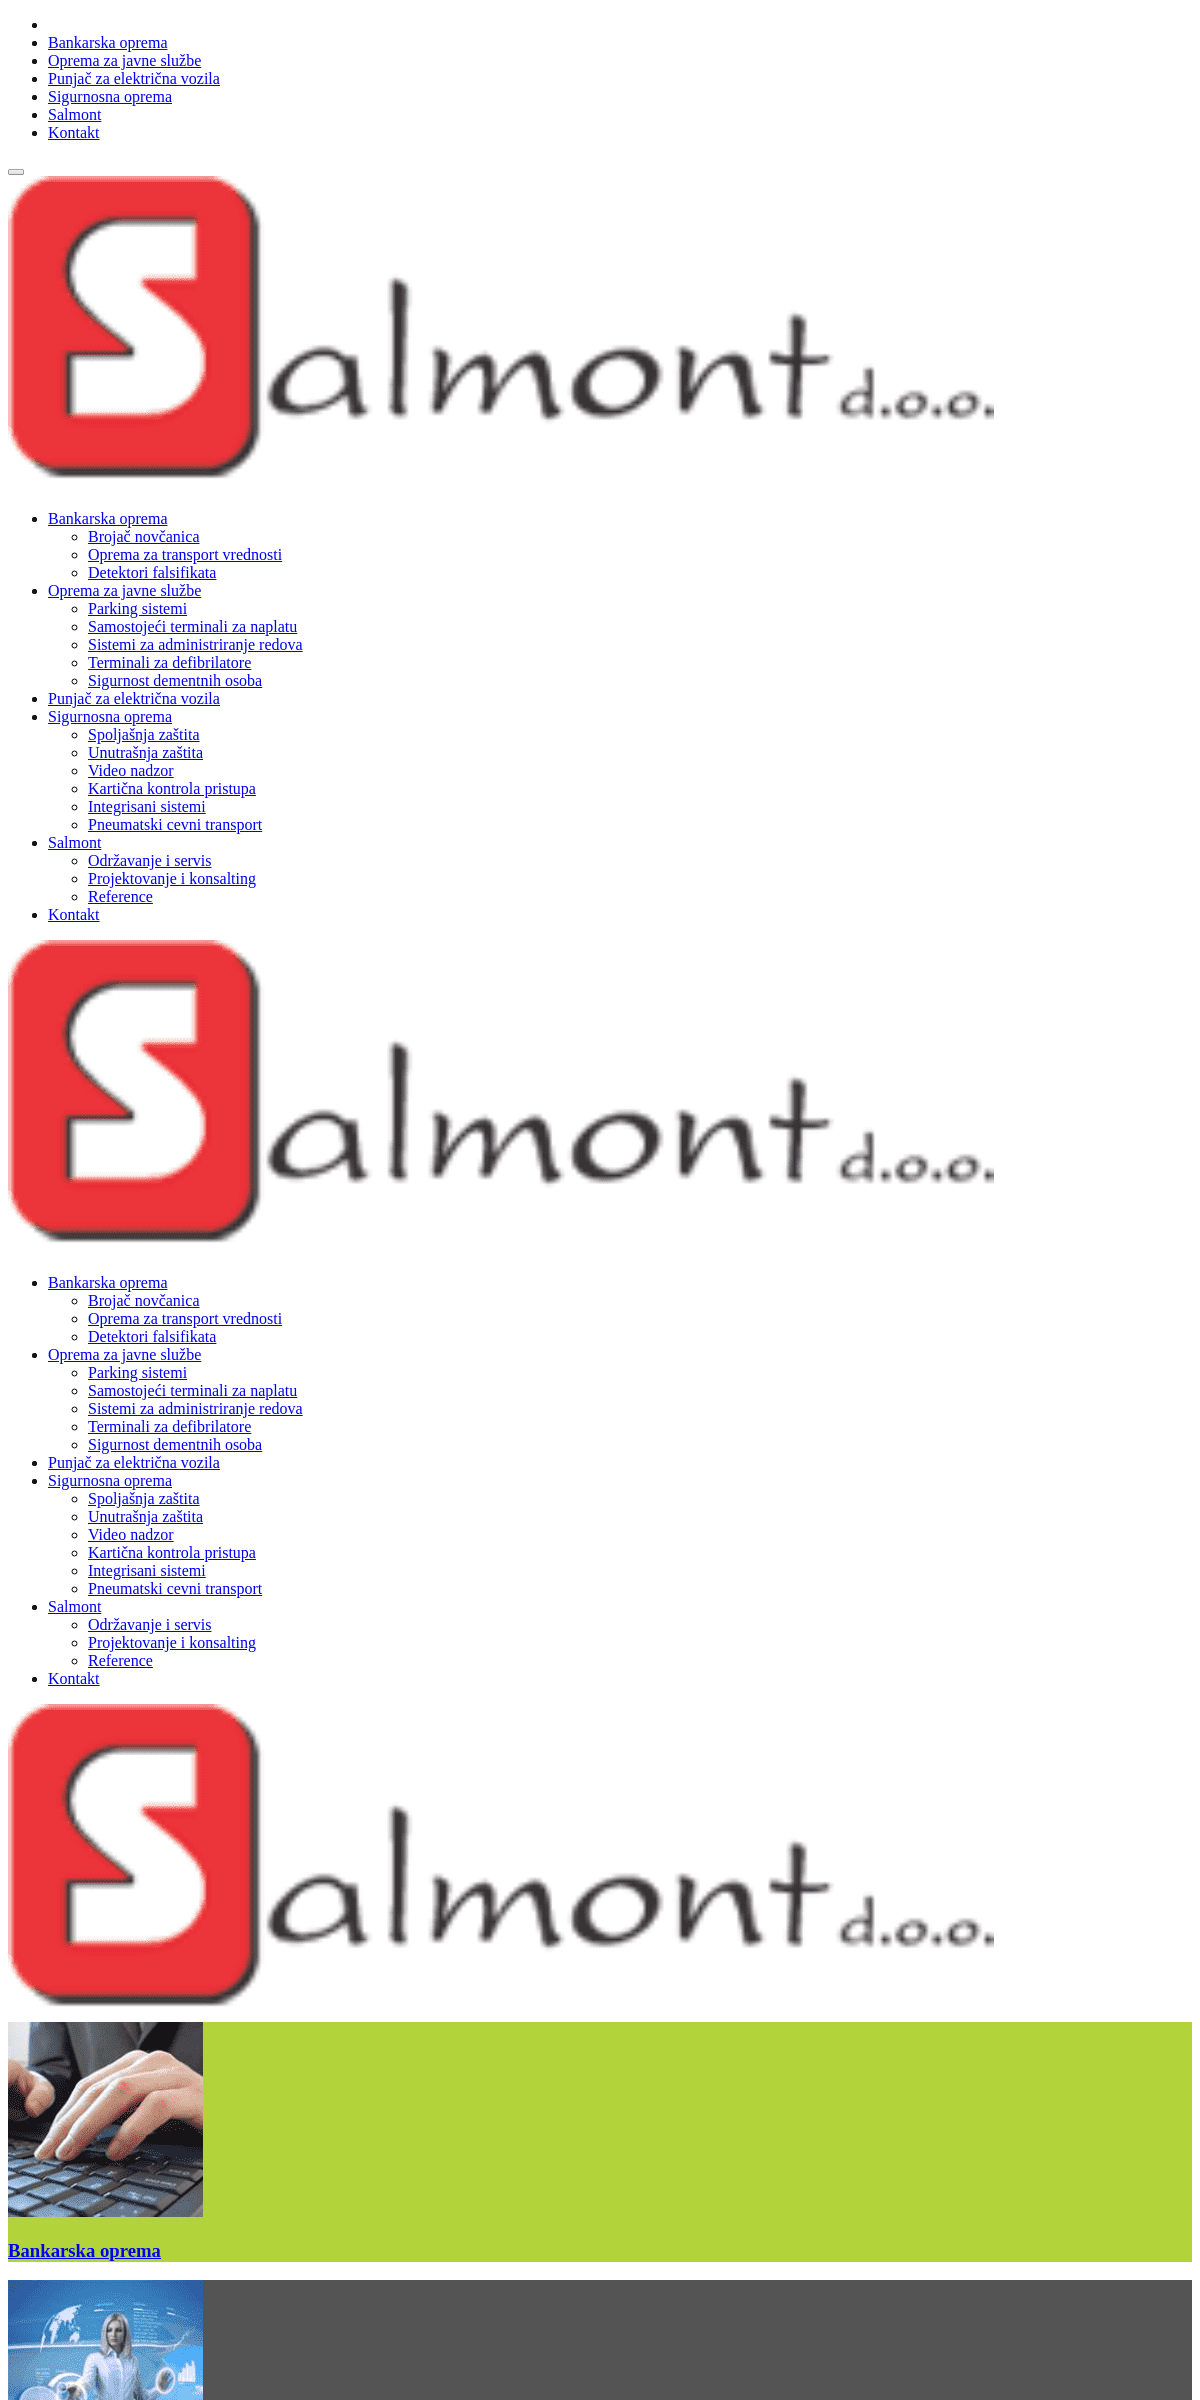 A complete backup of salmont.co.rs